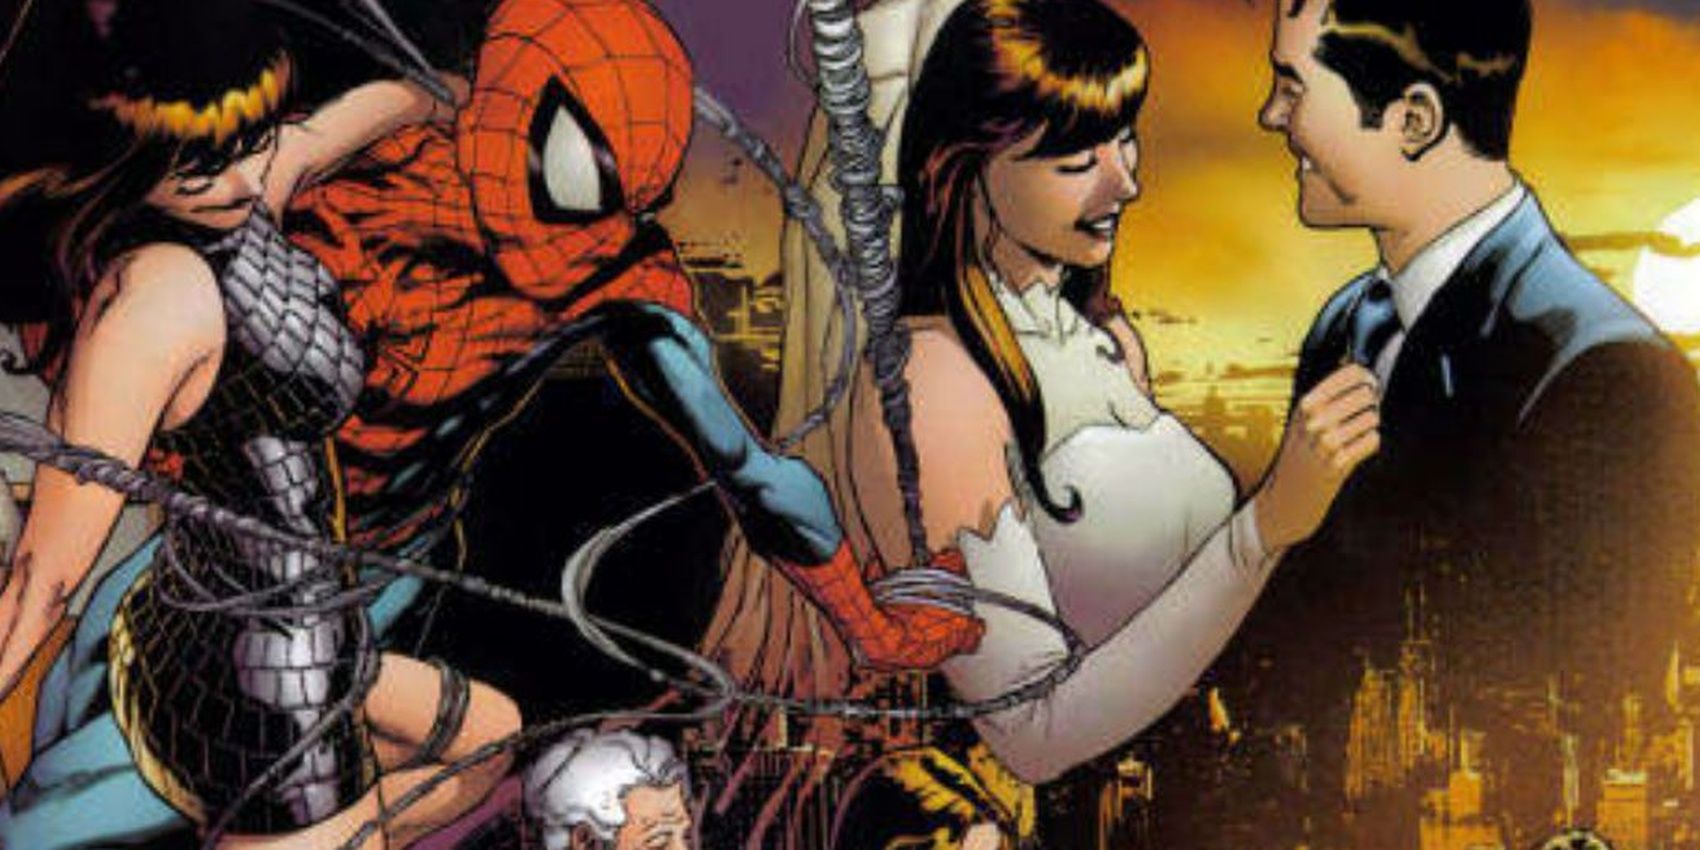 Spider-Man and Mary Jane during One More Day Marvel Comics event, embracing.